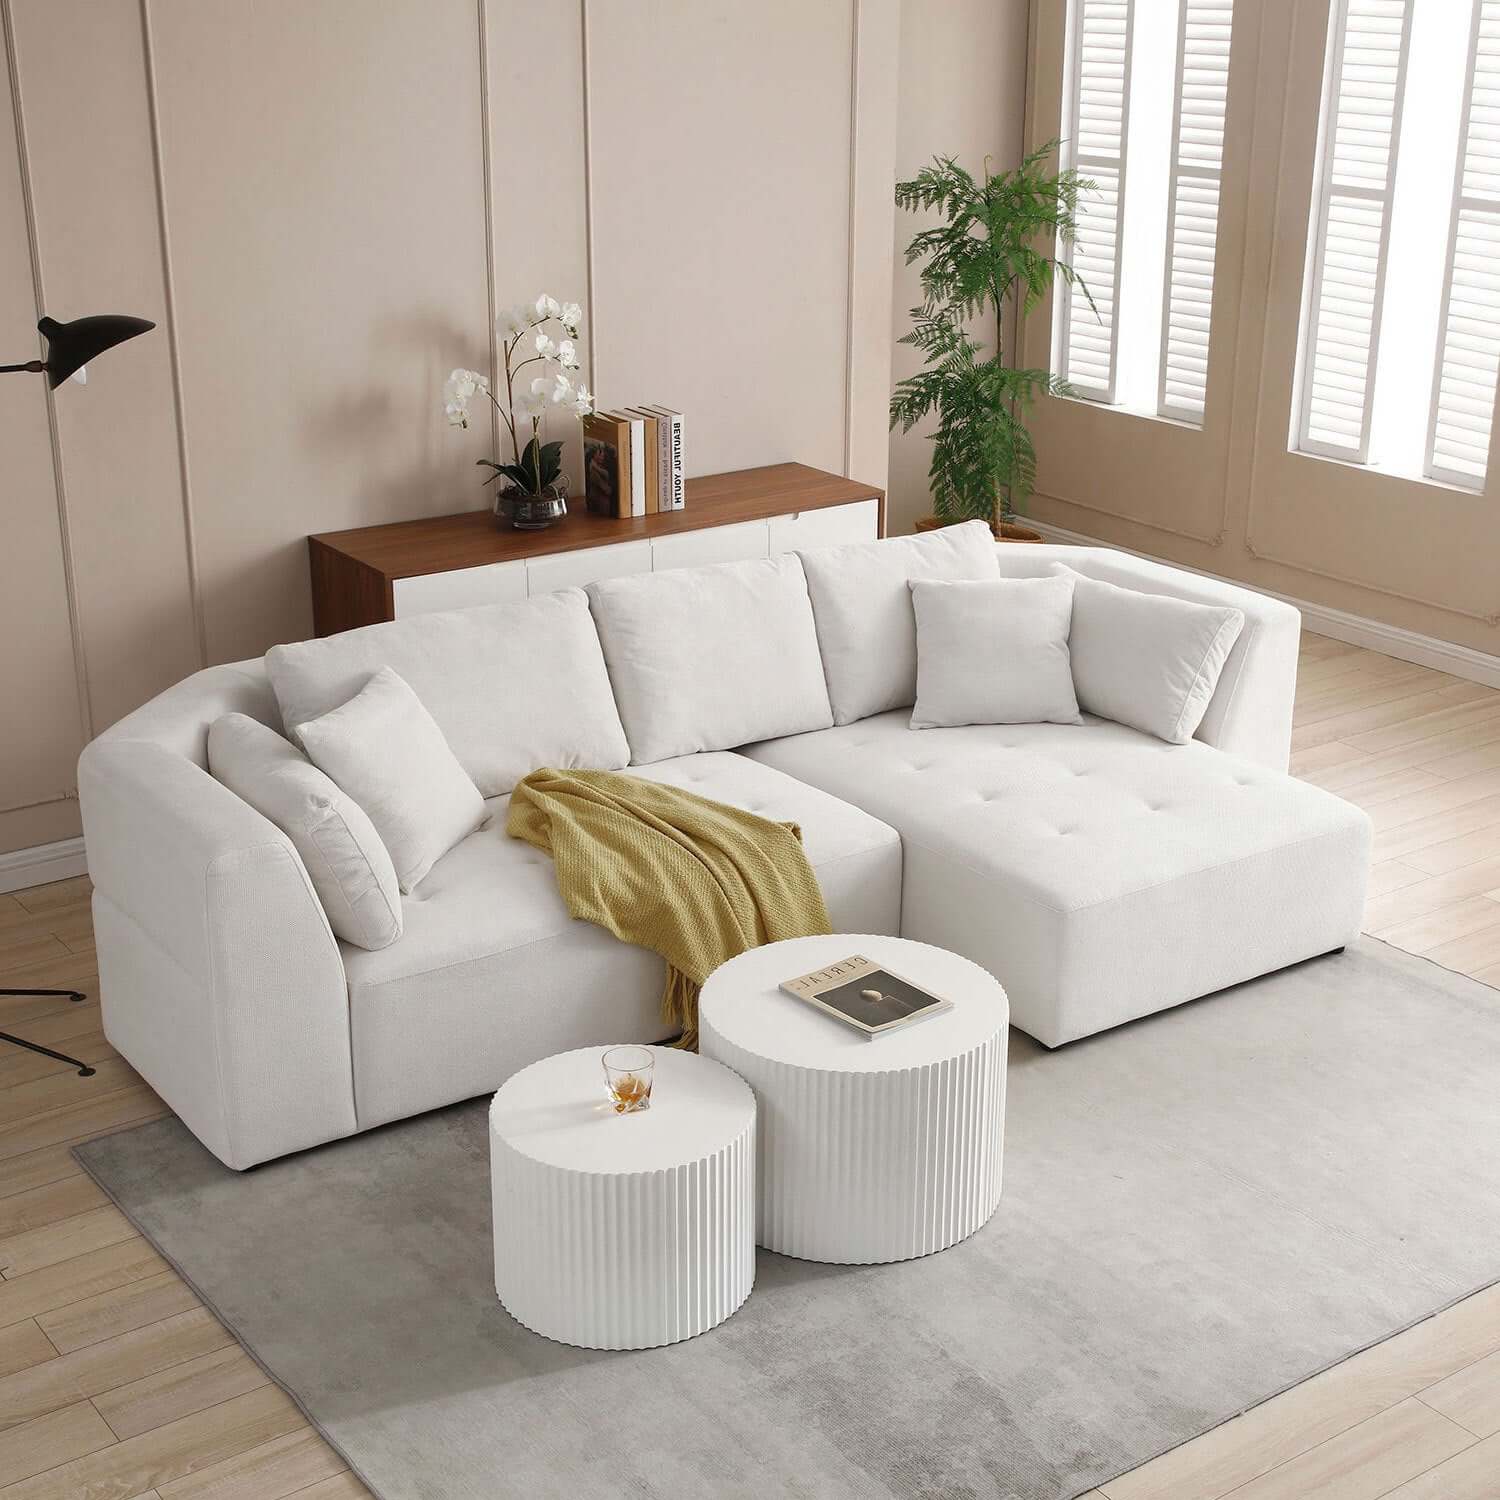 L-shaped Tufted Sectional Sofa, Beige with Left or Right-Facing Chaise - Revel Sofa 